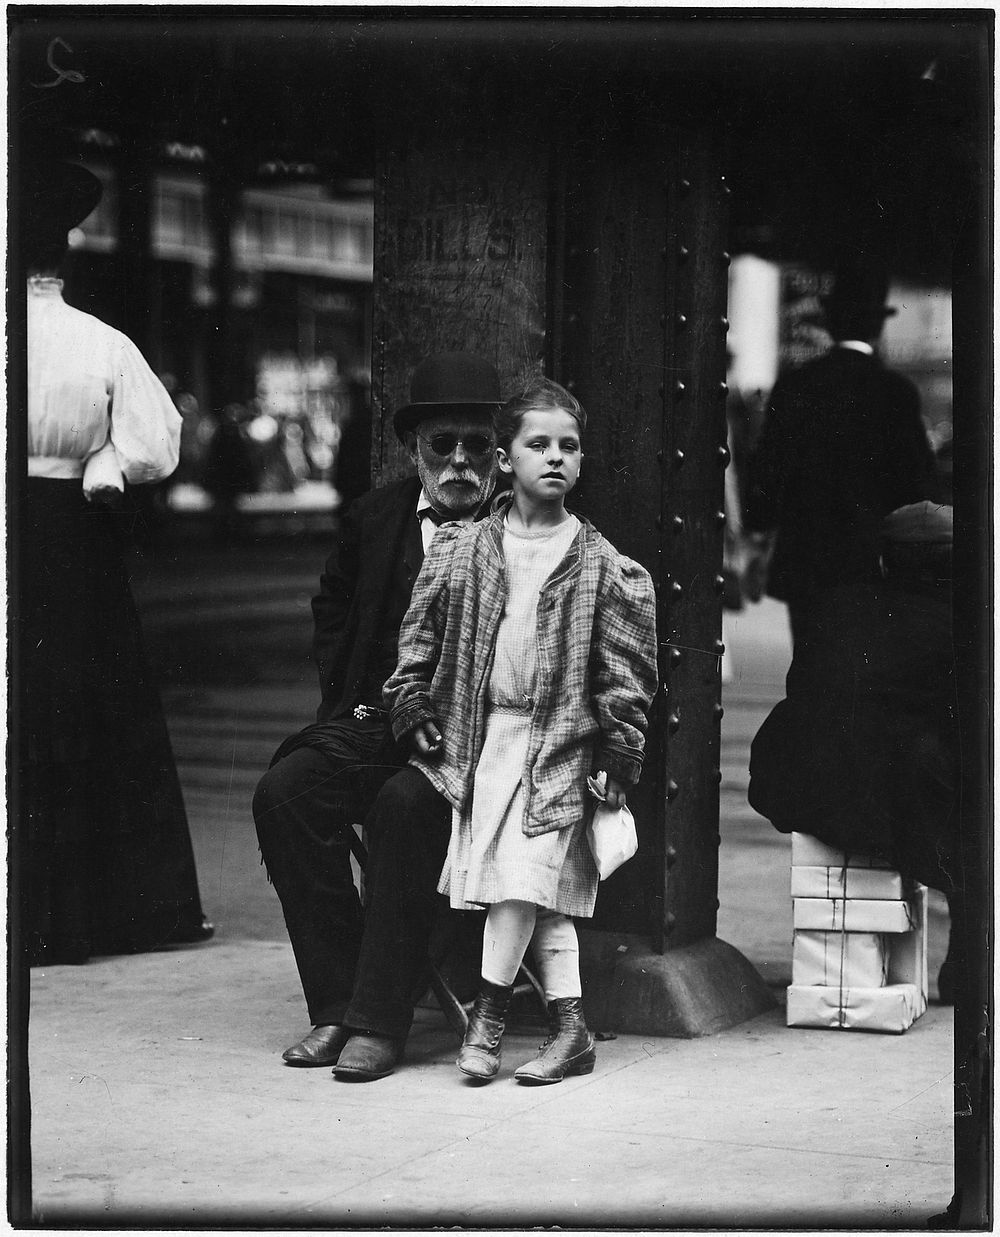 Mendicants. New York City, July 1910. Photographer: Hine, Lewis. Original public domain image from Flickr